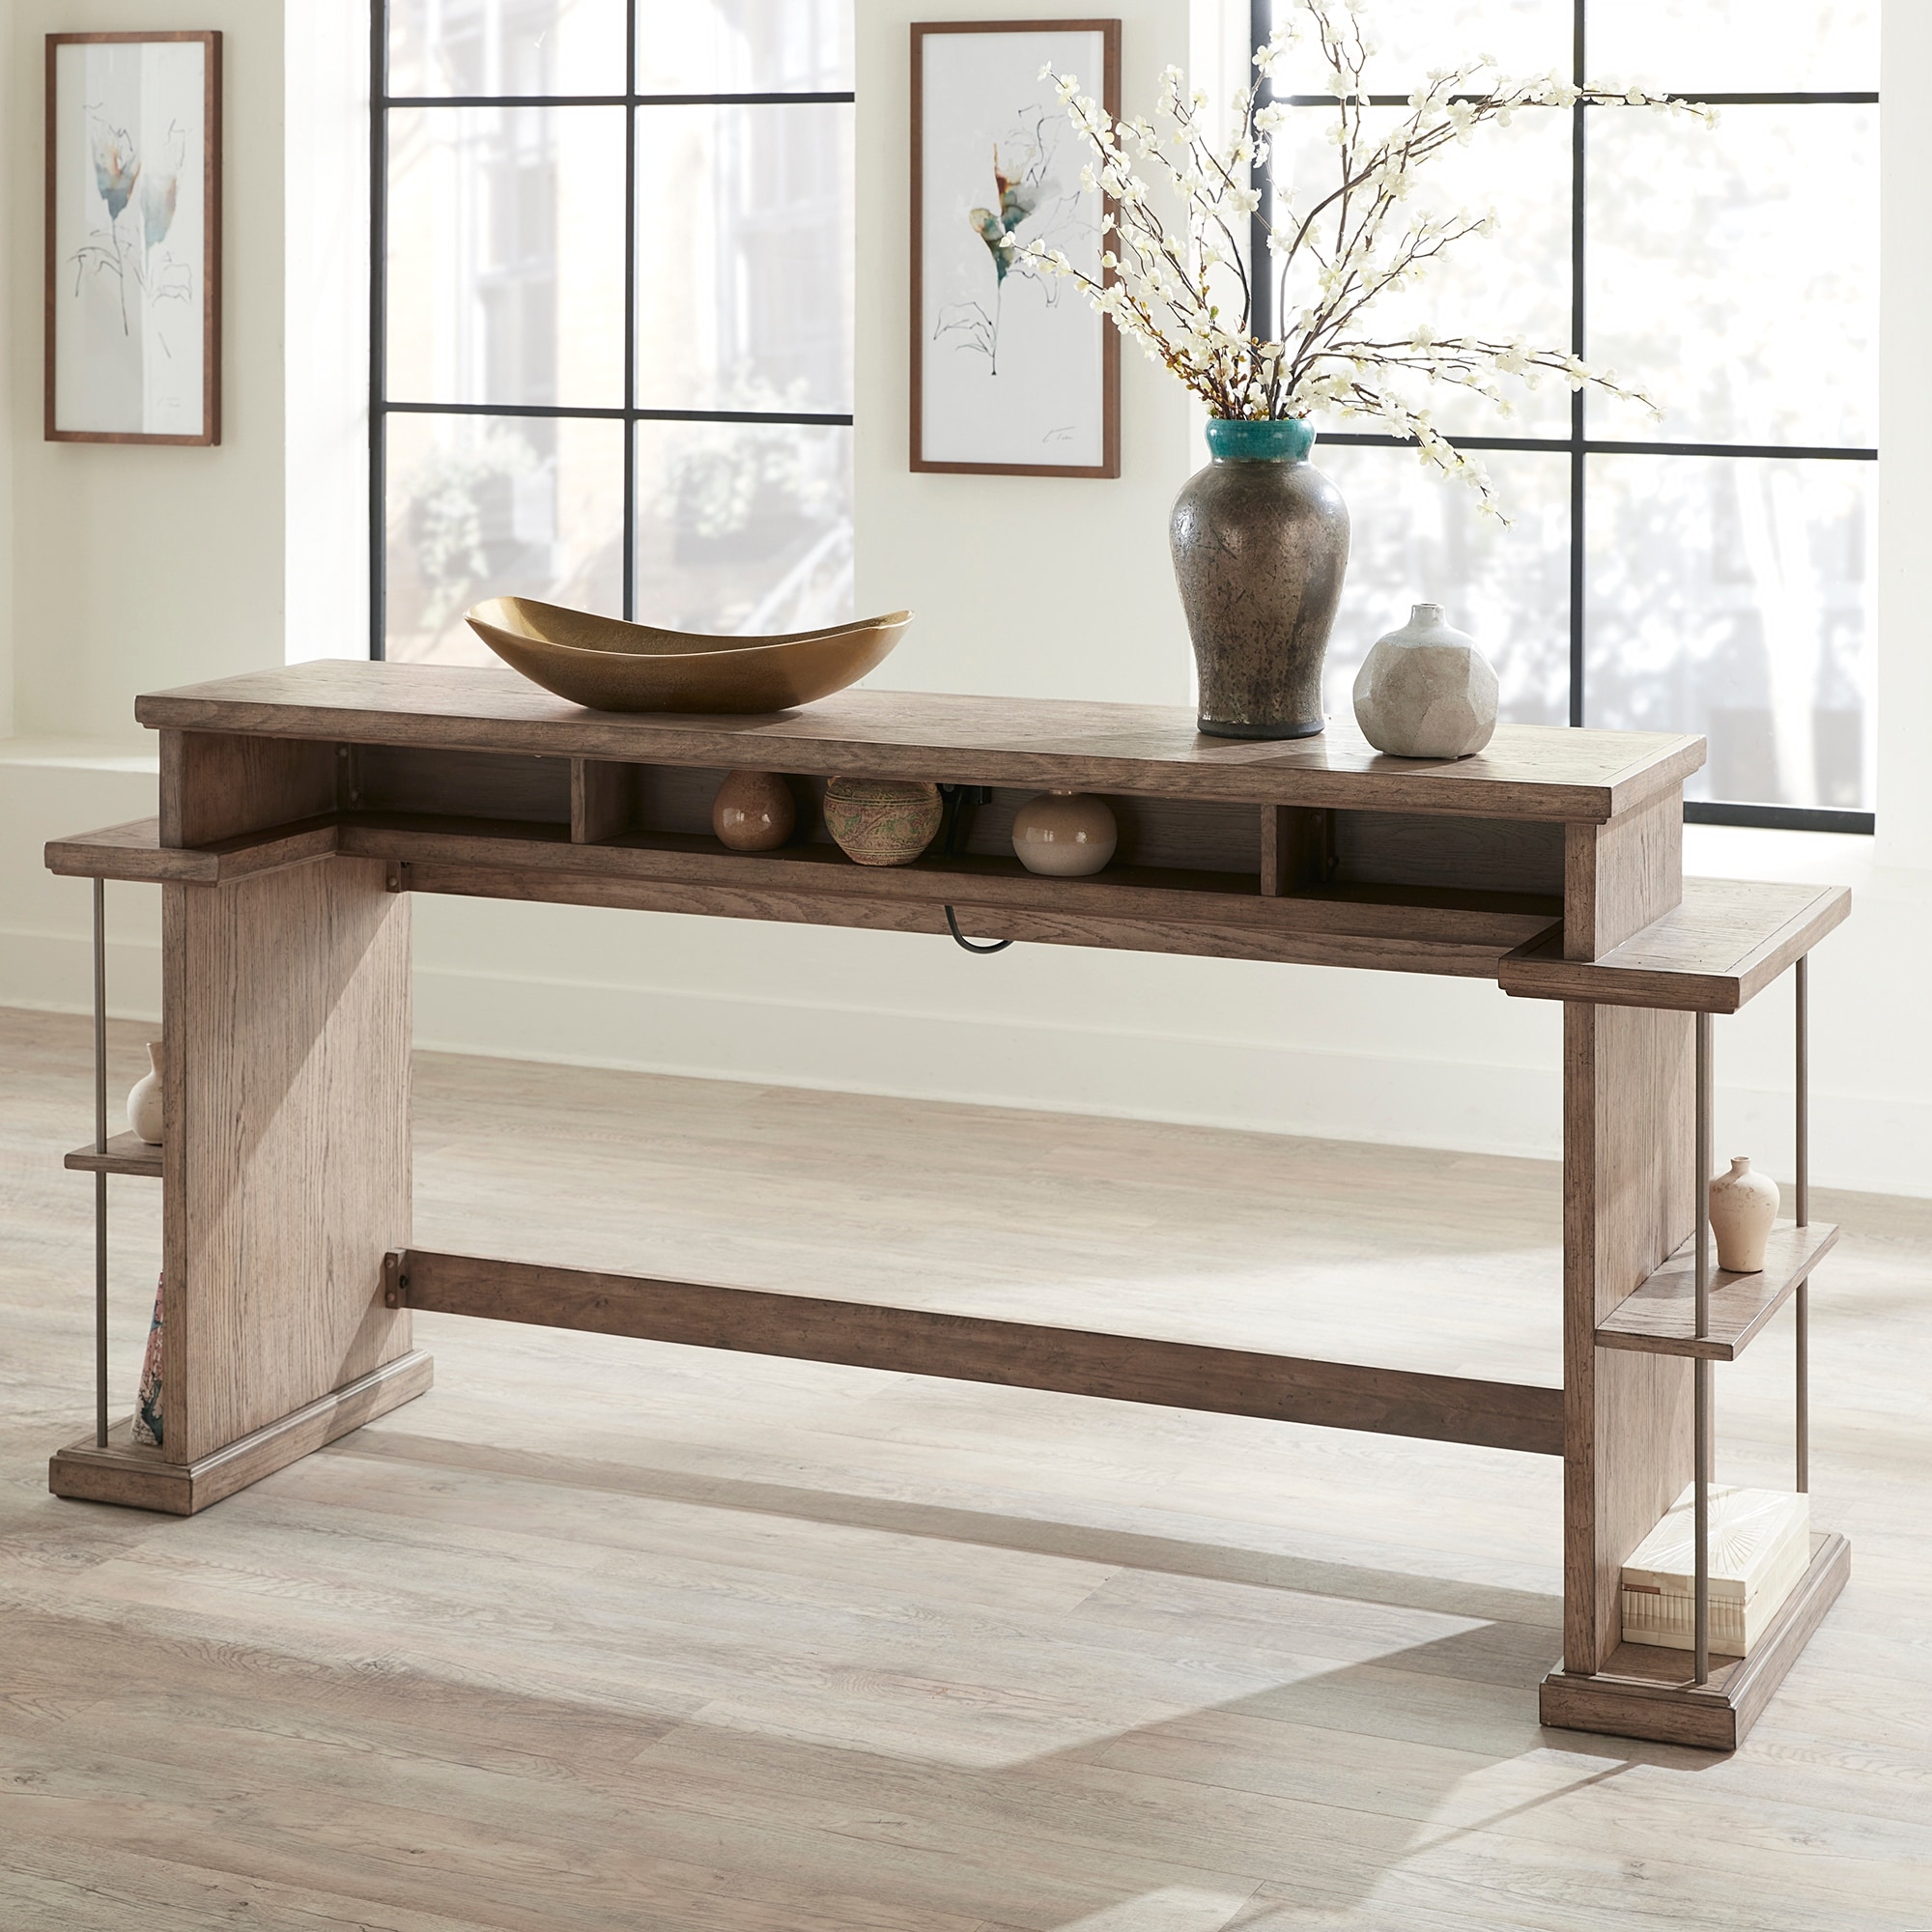 Liberty Furniture City Scape Burnished Beige Console Bar Table